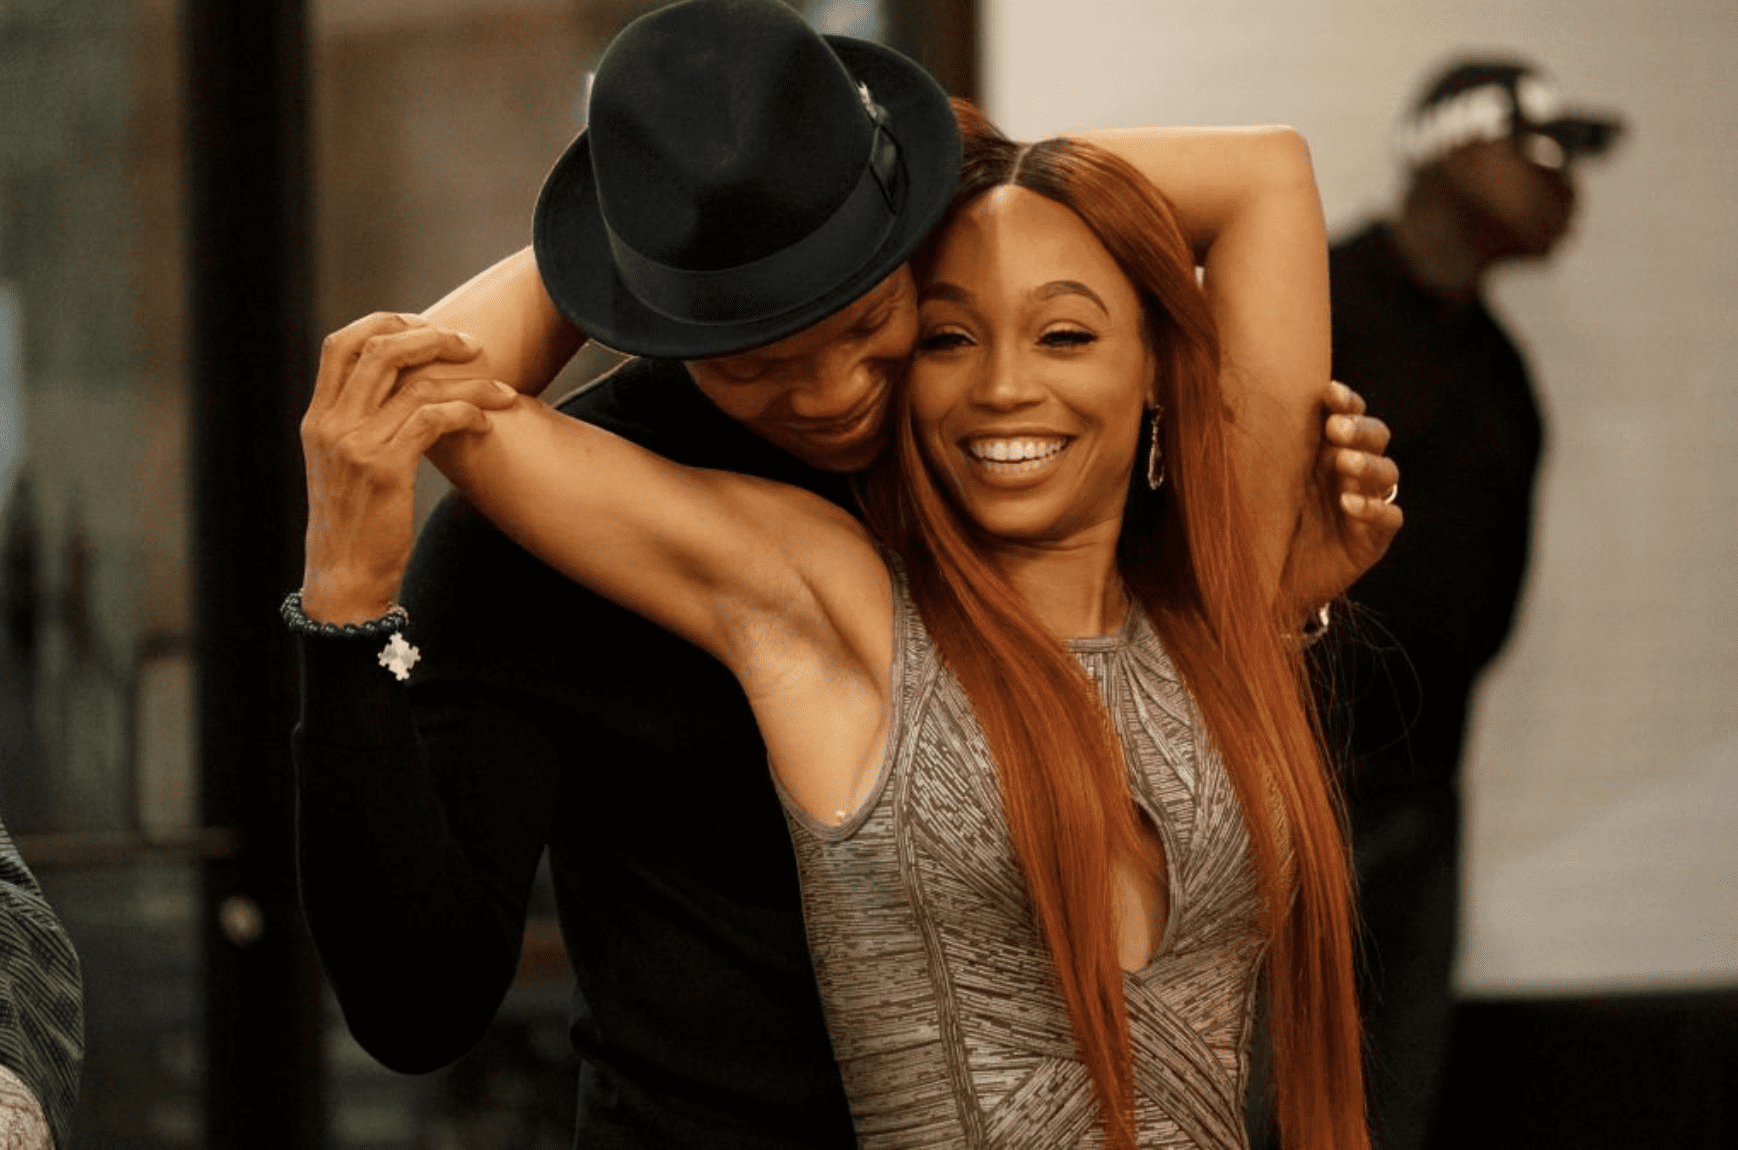 Ronnie DeVoe and Shamari DeVoe share an embrace on an episode of season 11 of "The Real Housewives of Atlanta" on October 24, 2018. | Source: Getty Images